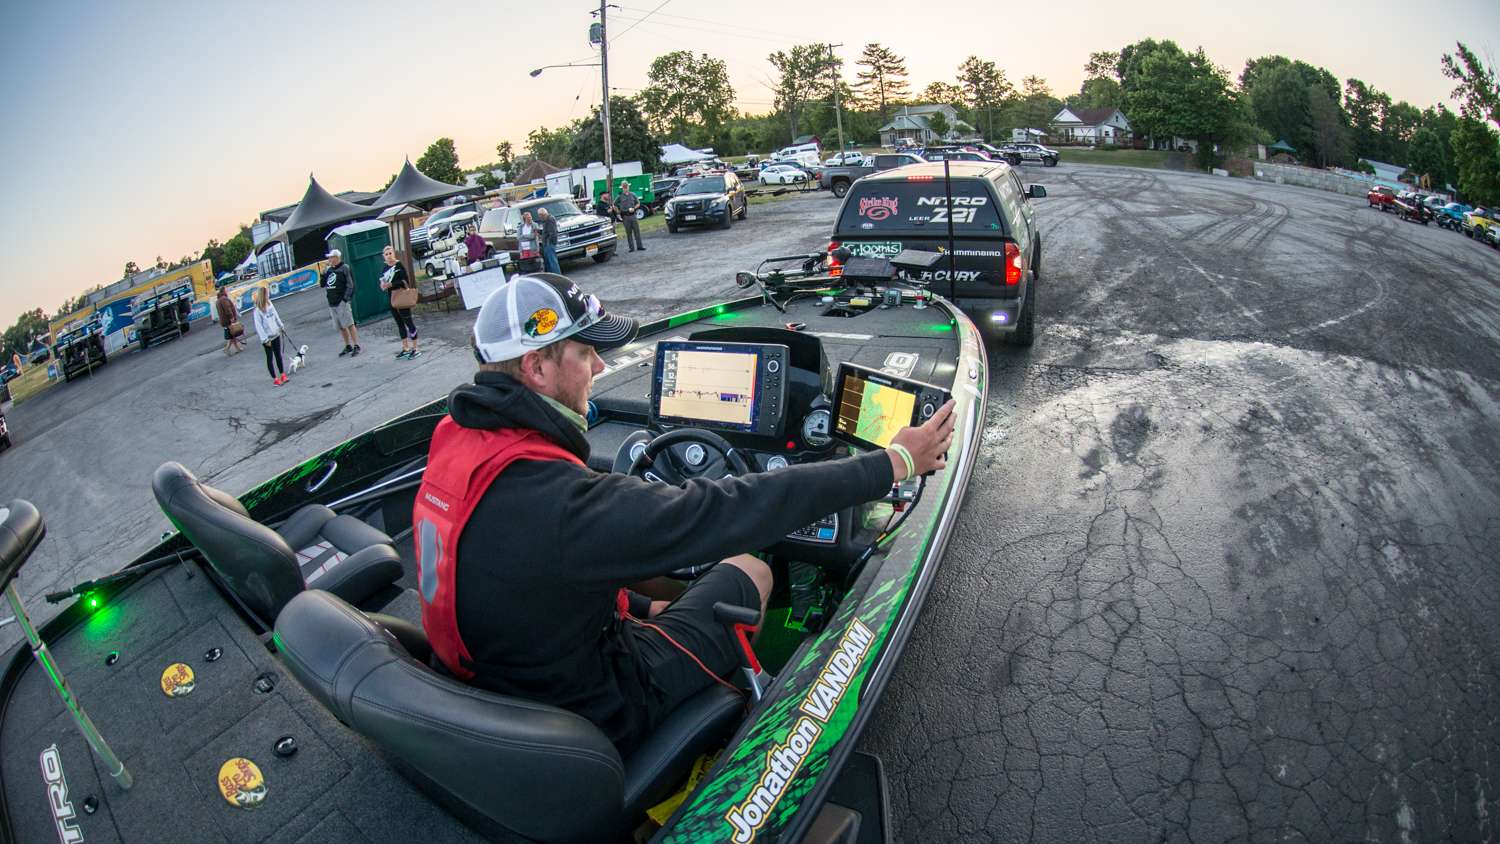 Jonathan VanDam launched next, while dialing in his first fishing spot of the day. 